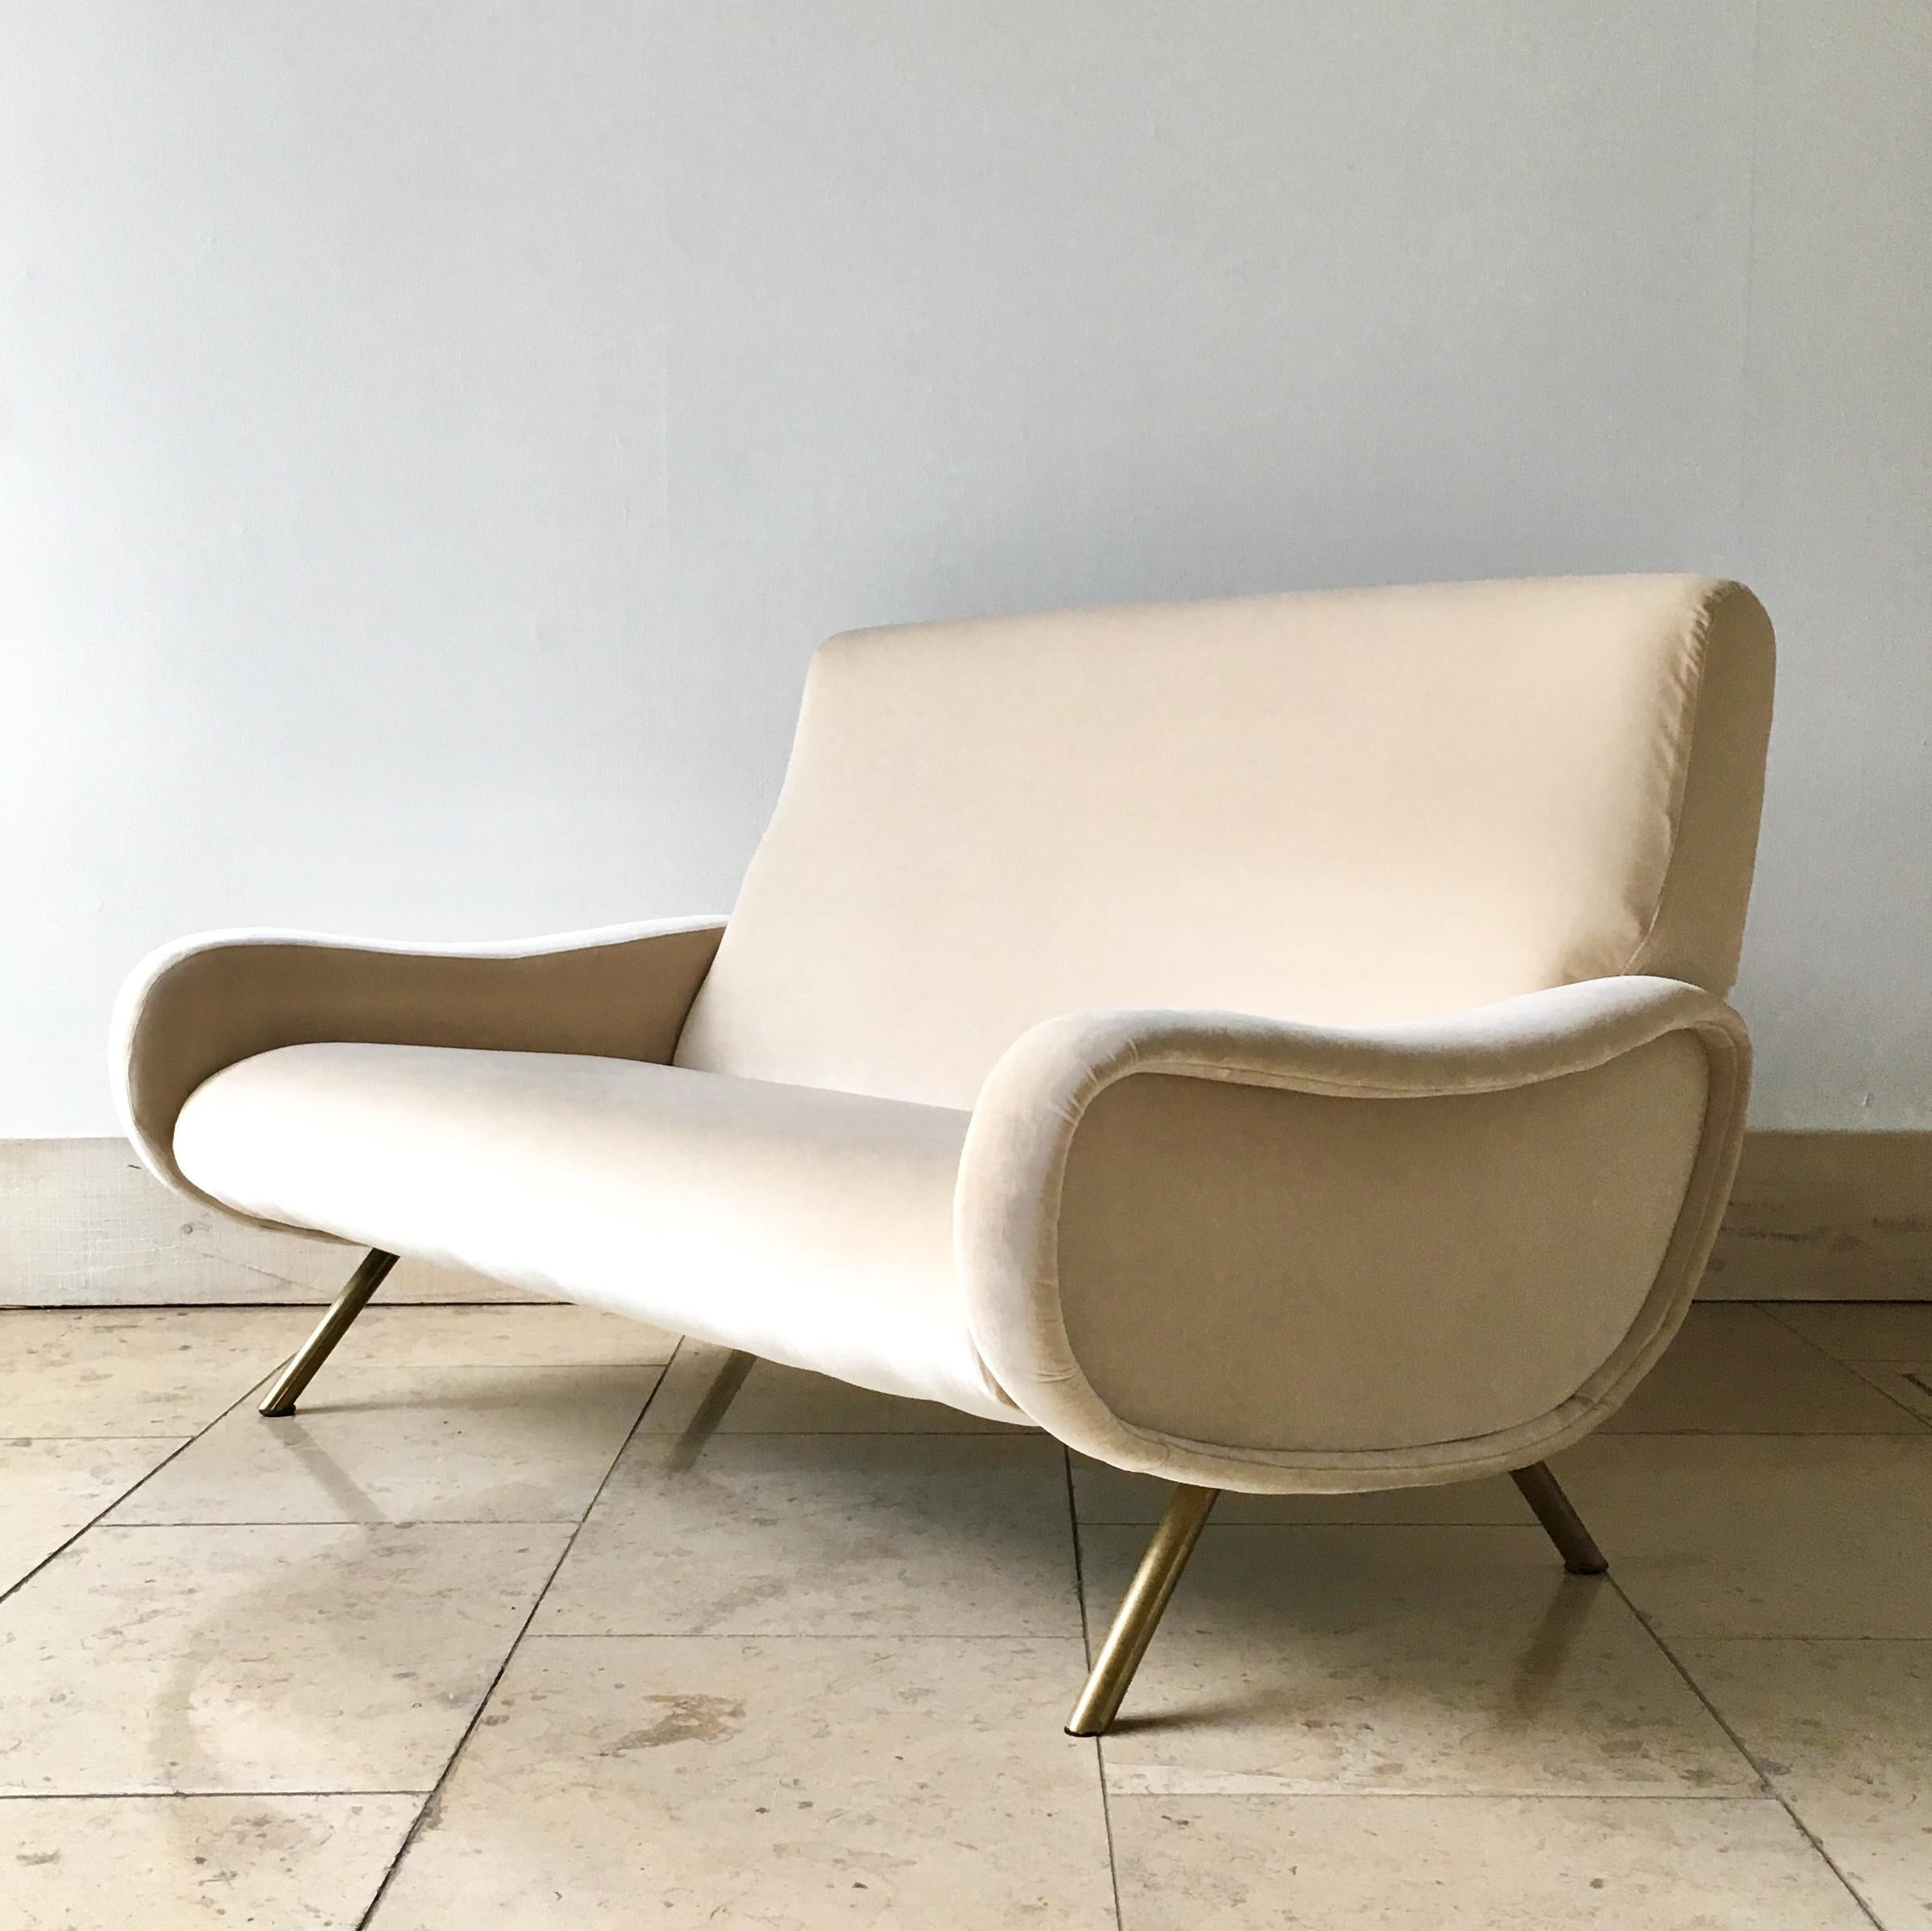 Rare authentic two-seat Marco Zanuso lady sofa, Arflex, France/Italy, 1960s. Reupholstered in ivory velvet.    Fast shipping worldwide - please contact us for options.